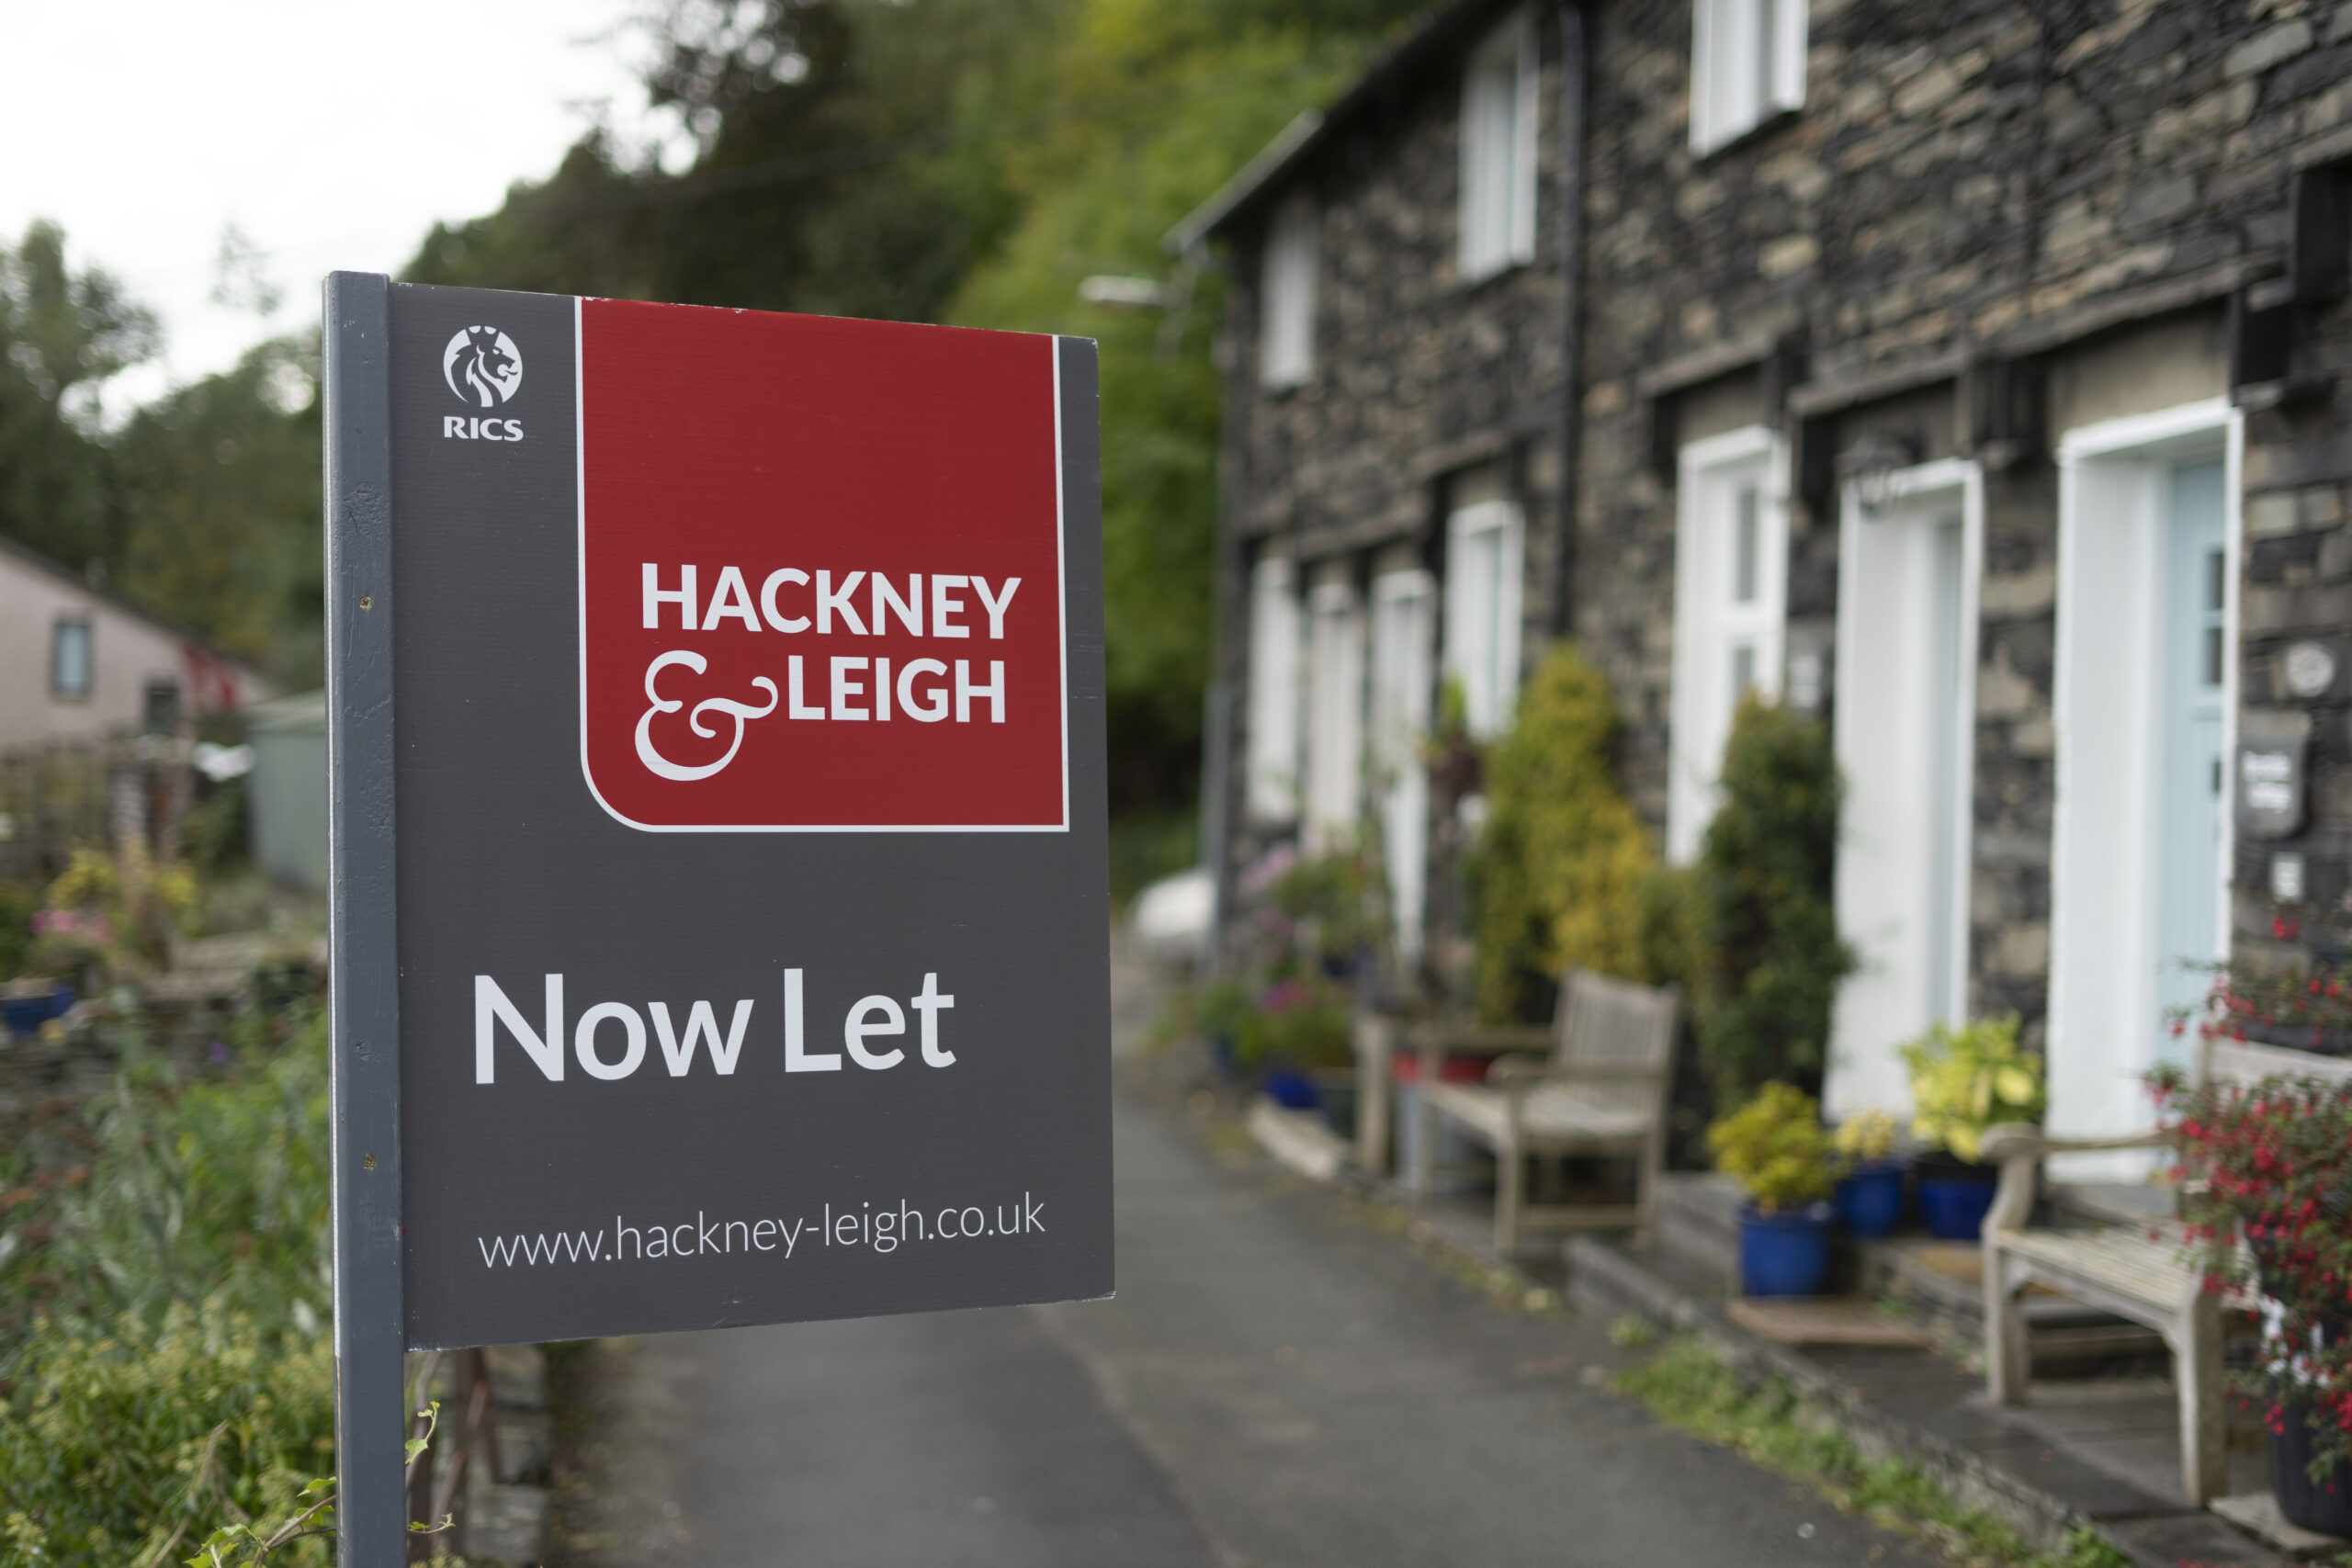 Hackney & Leigh now let board outside of a house